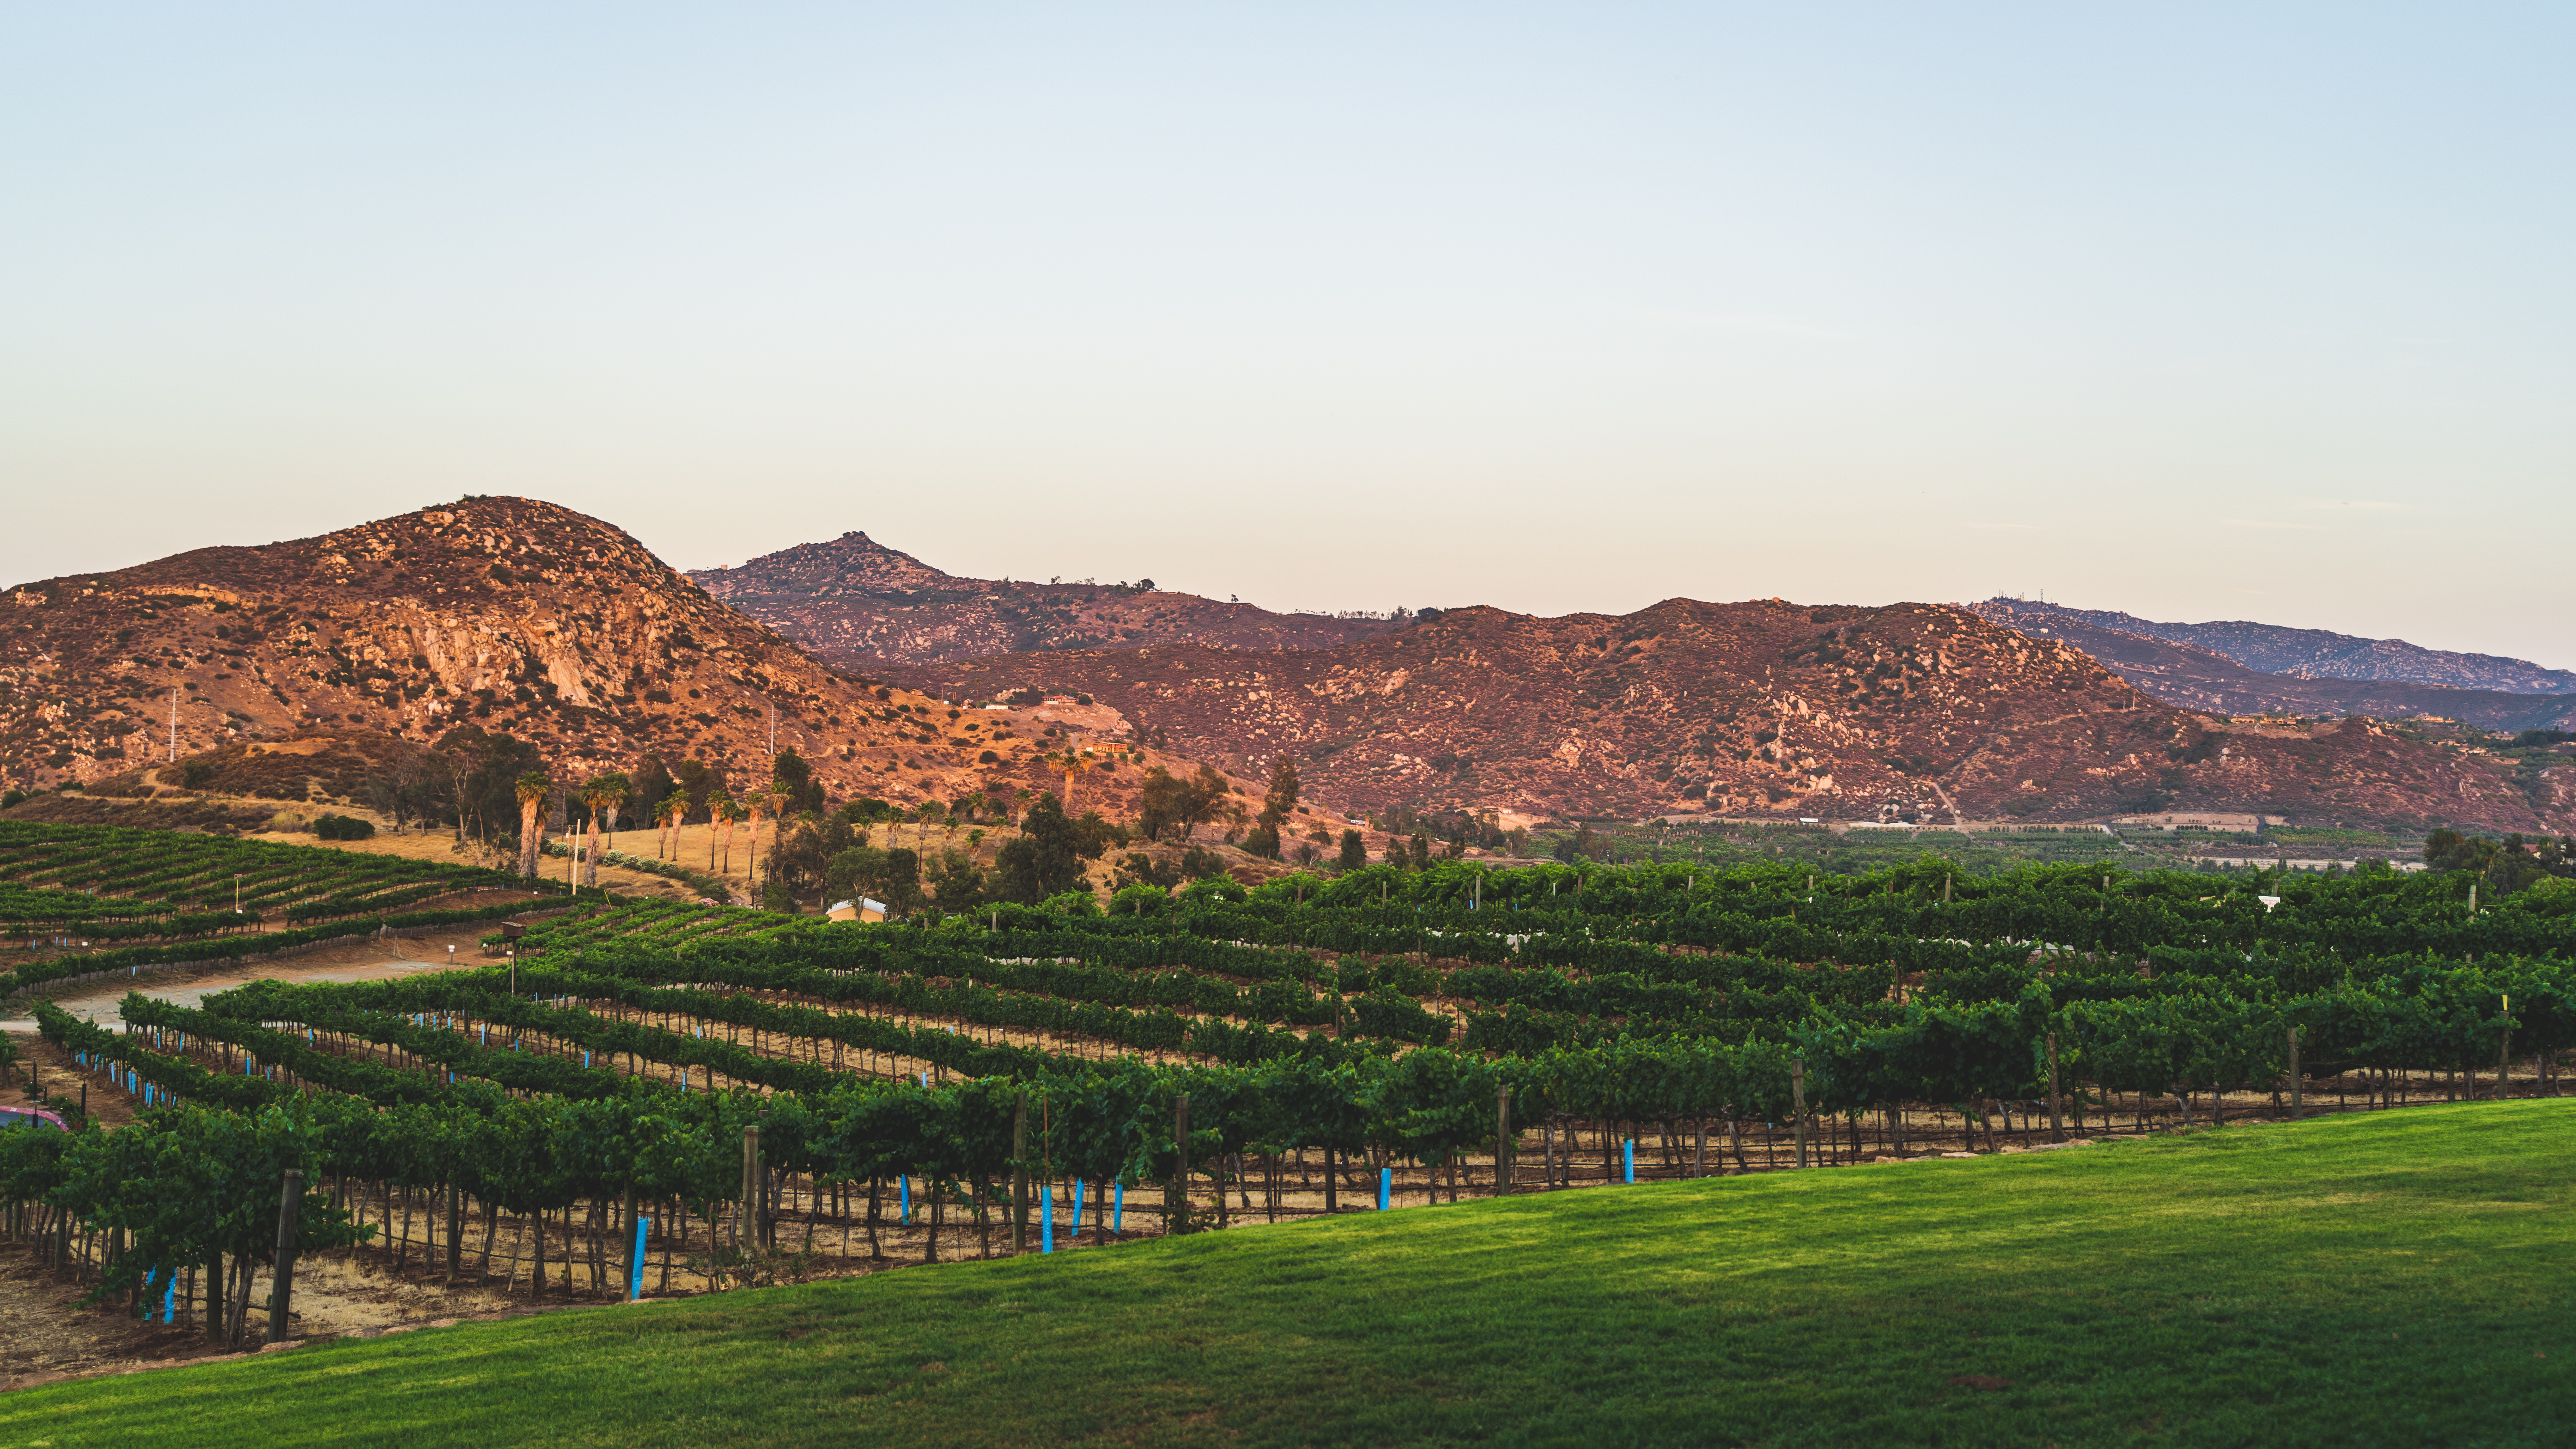 Rows of grape vines at Southern California vineyard at sunset in the San Pasqual Valley outside of San Diego (Adobe Stock)